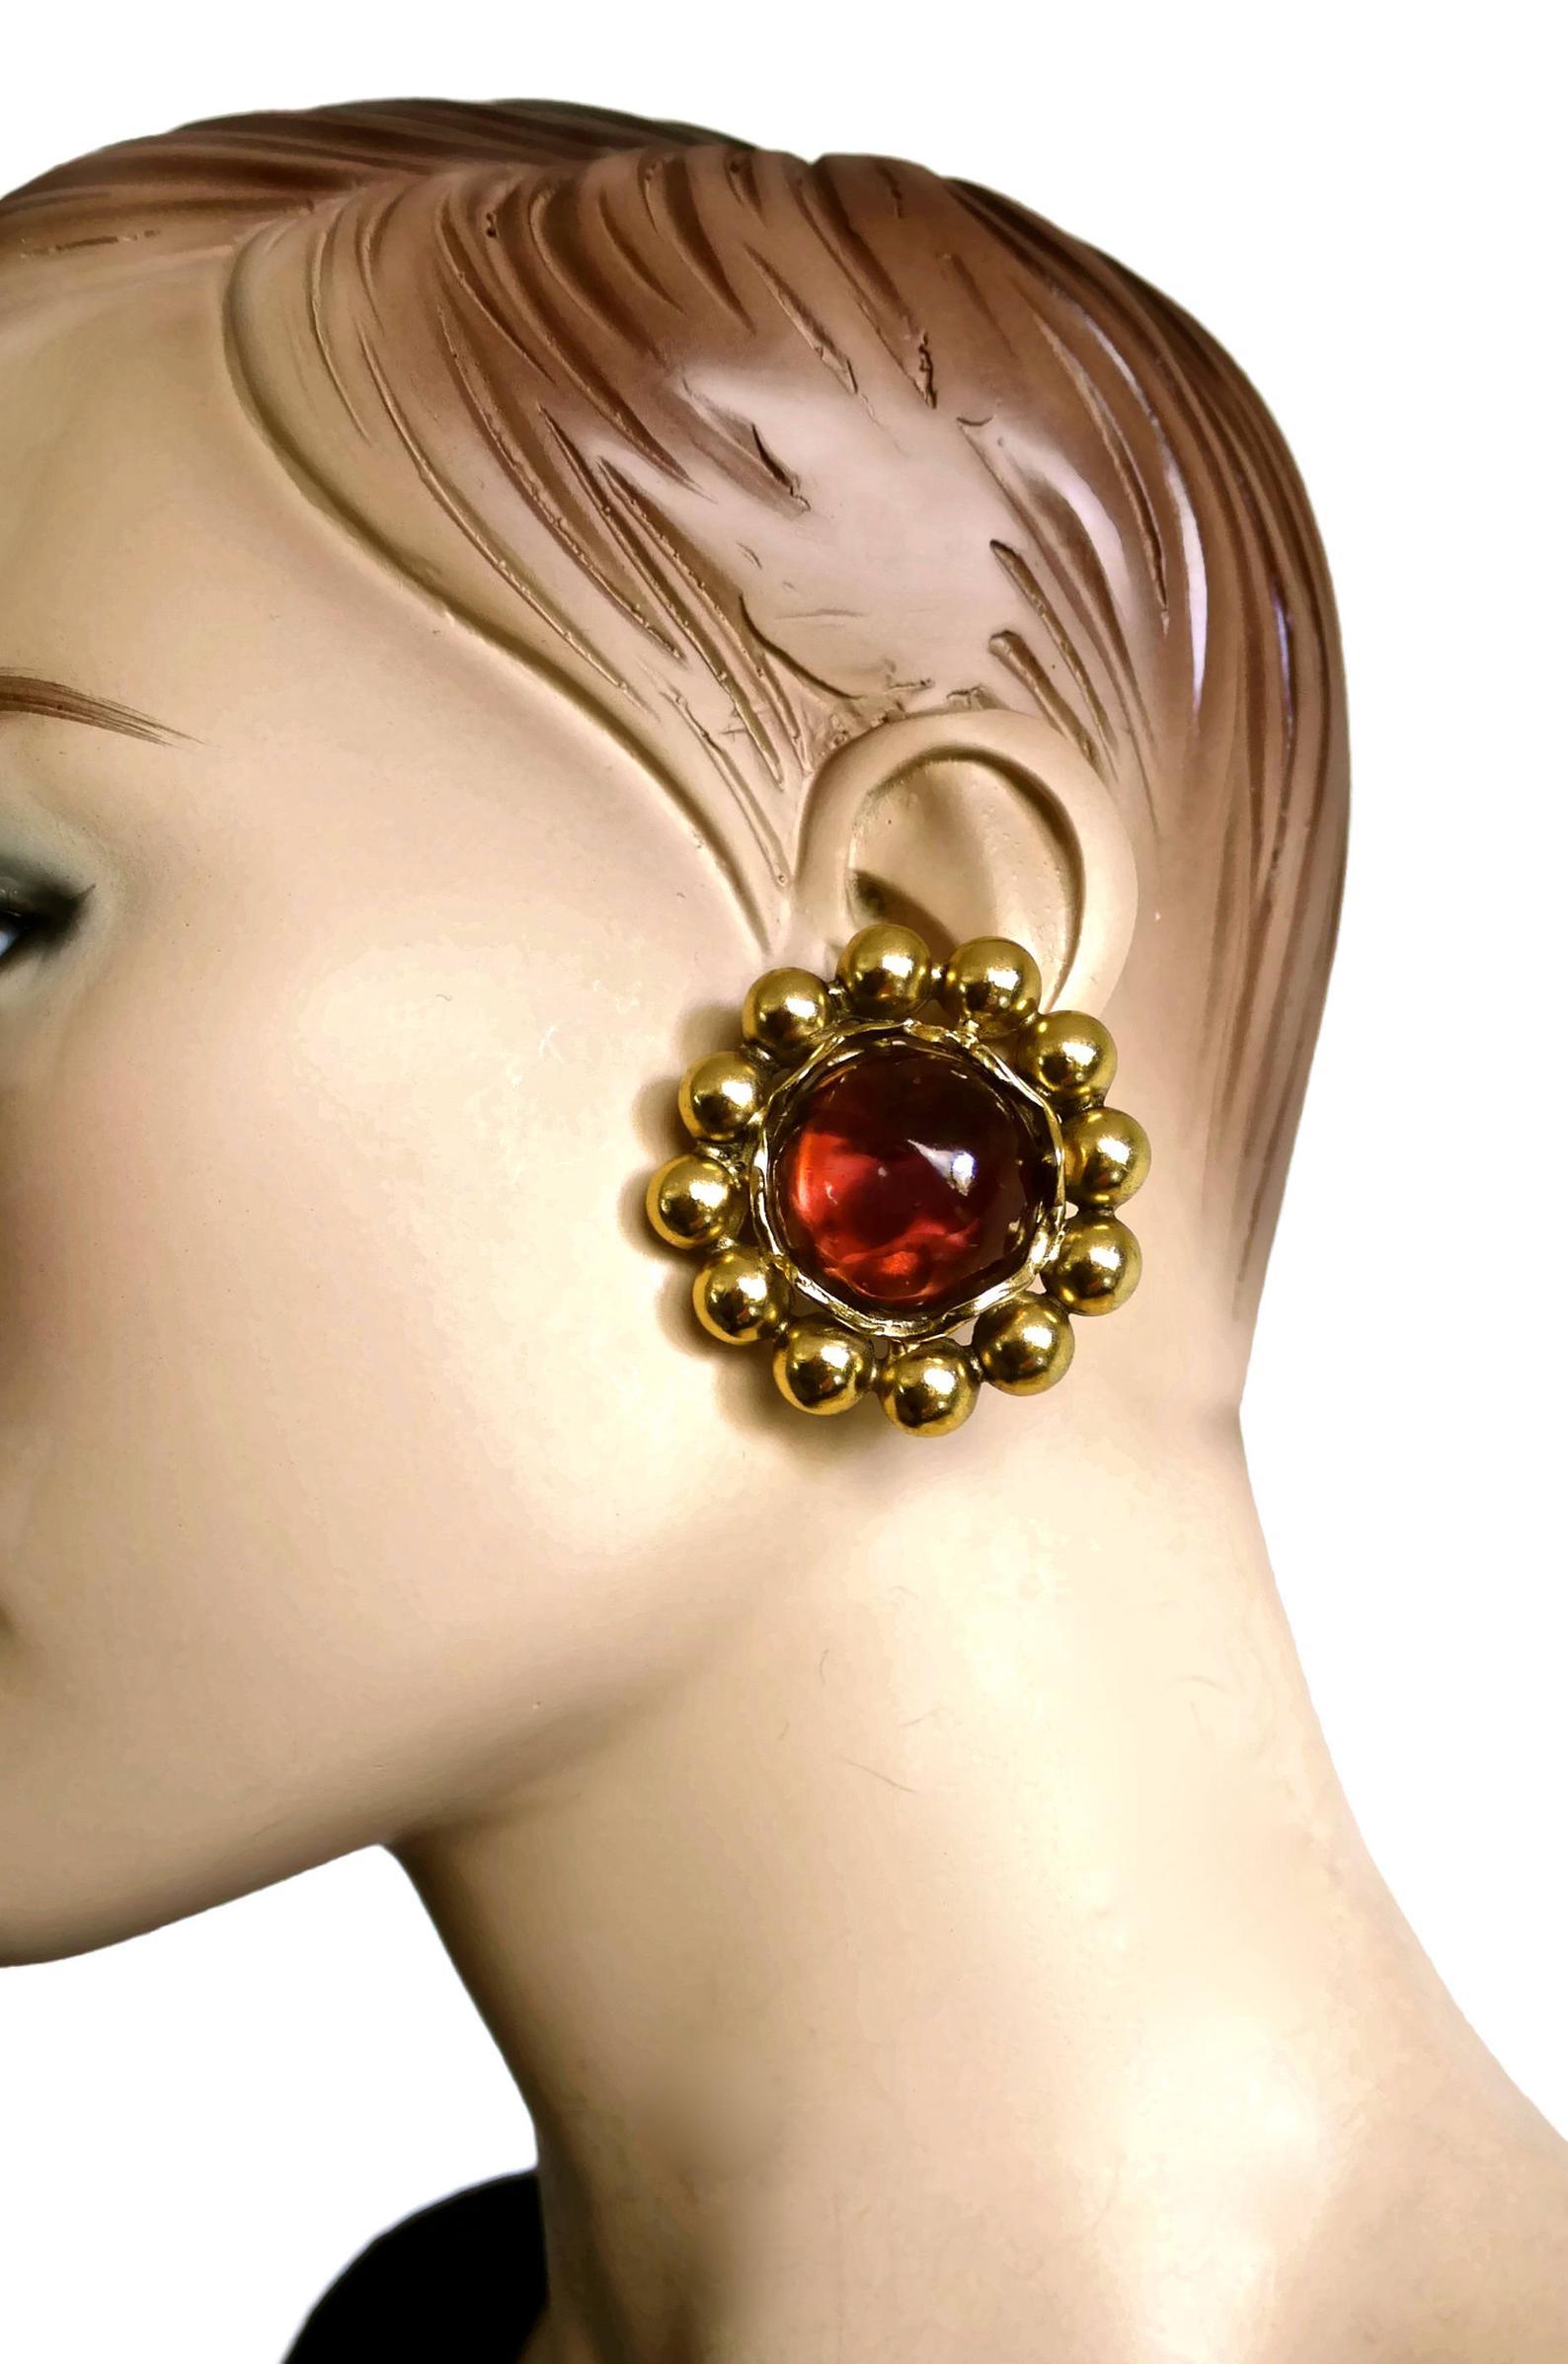 Vintage YSL Yves Saint Laurent Dark Amber Resin Poured Flower Earrings

Measurements:
Height: 1.85 inches (4.7 cm)
Width: 1.85 inches (4.7 cm)
Depth: 0.43 inch (1.1 cm)
Weight: 27 grams

Features:
- 100% Authentic YVES SAINT LAURENT.
- Flower